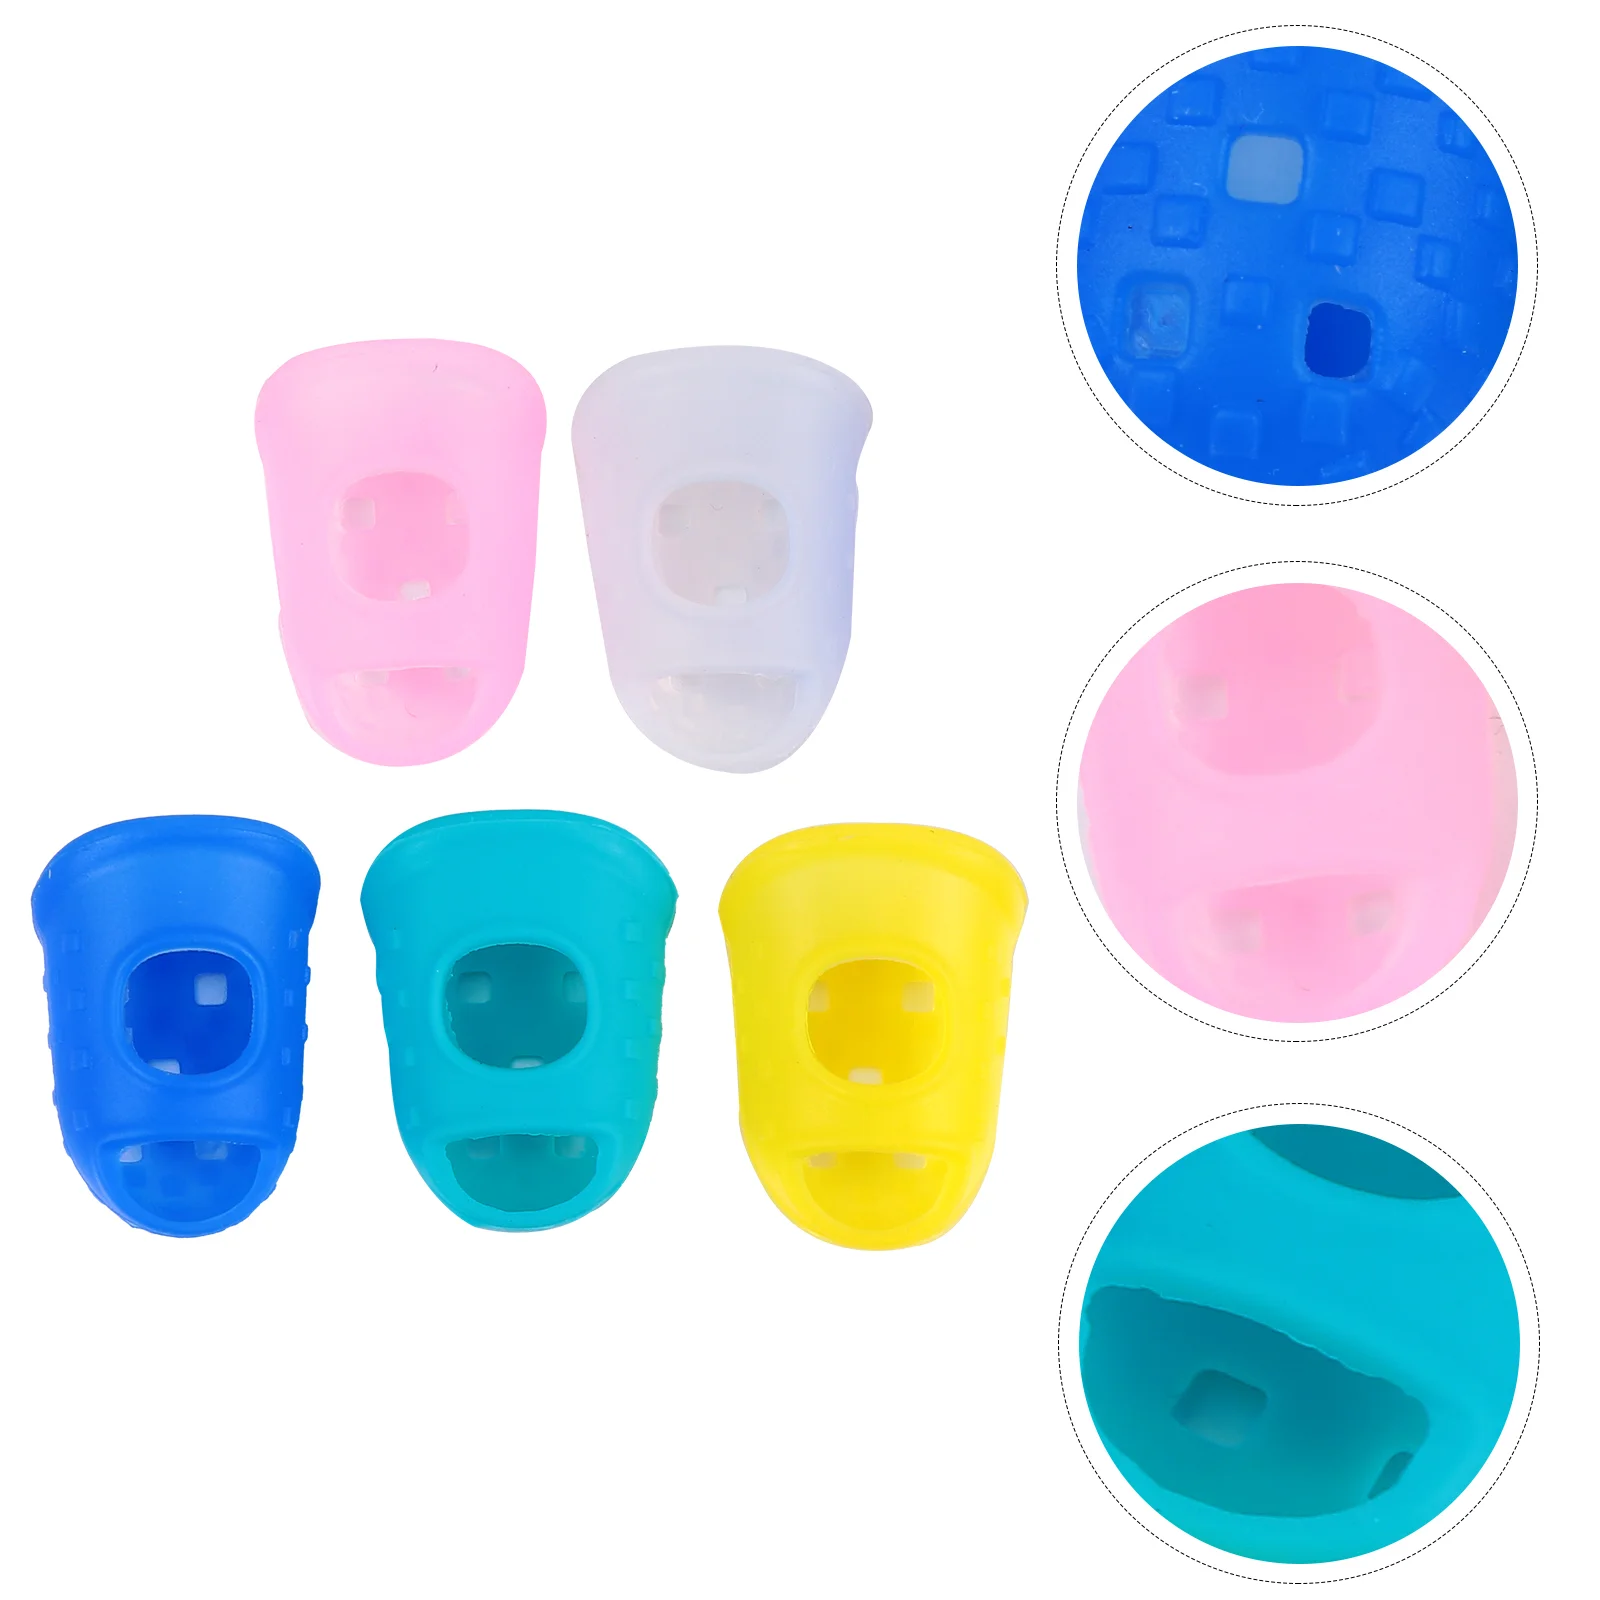 

Silicone Finger Cots Convenient Fingertip Guards Protection Covers Practical Stalls Protectors Sturdy Sleeves Counting Money